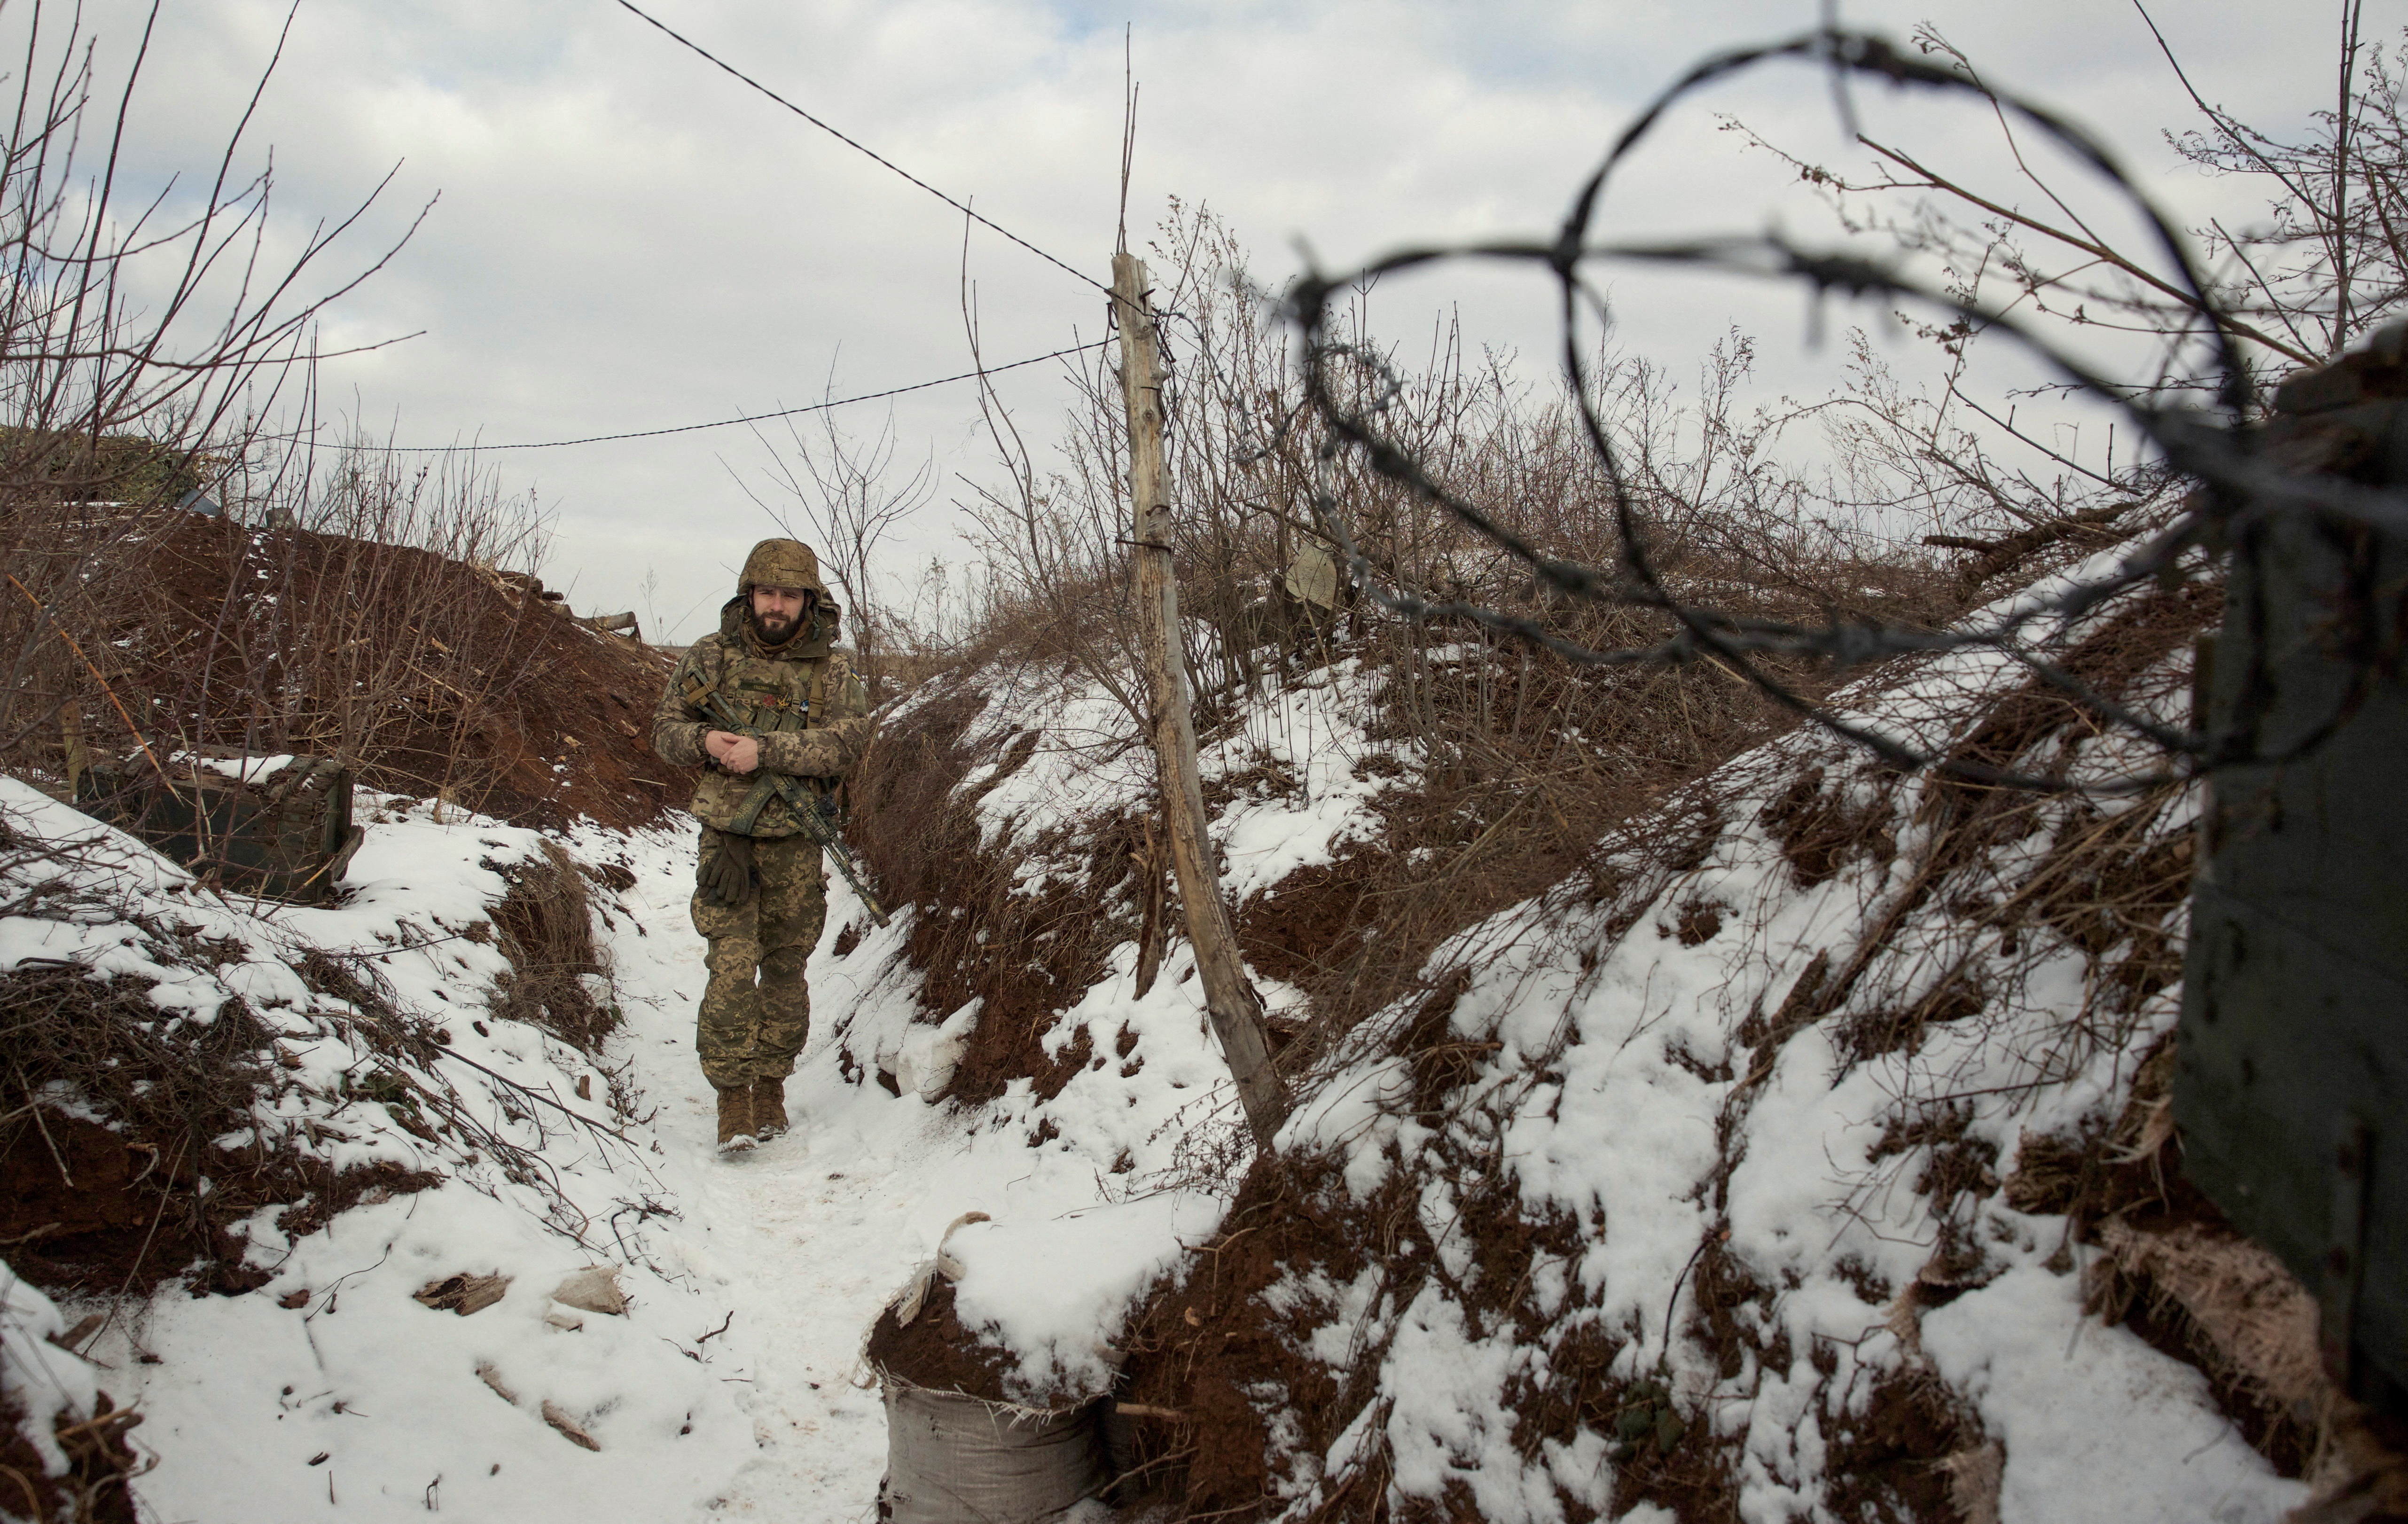 A service member of the Ukrainian armed forces walks at combat positions near the line of separation from Russian-backed rebels near Horlivka in the Donetsk region, Ukraine, January 22, 2022. Picture taken January 22, 2022. Picture taken REUTERS/Anna Kudriavtseva/File Photo